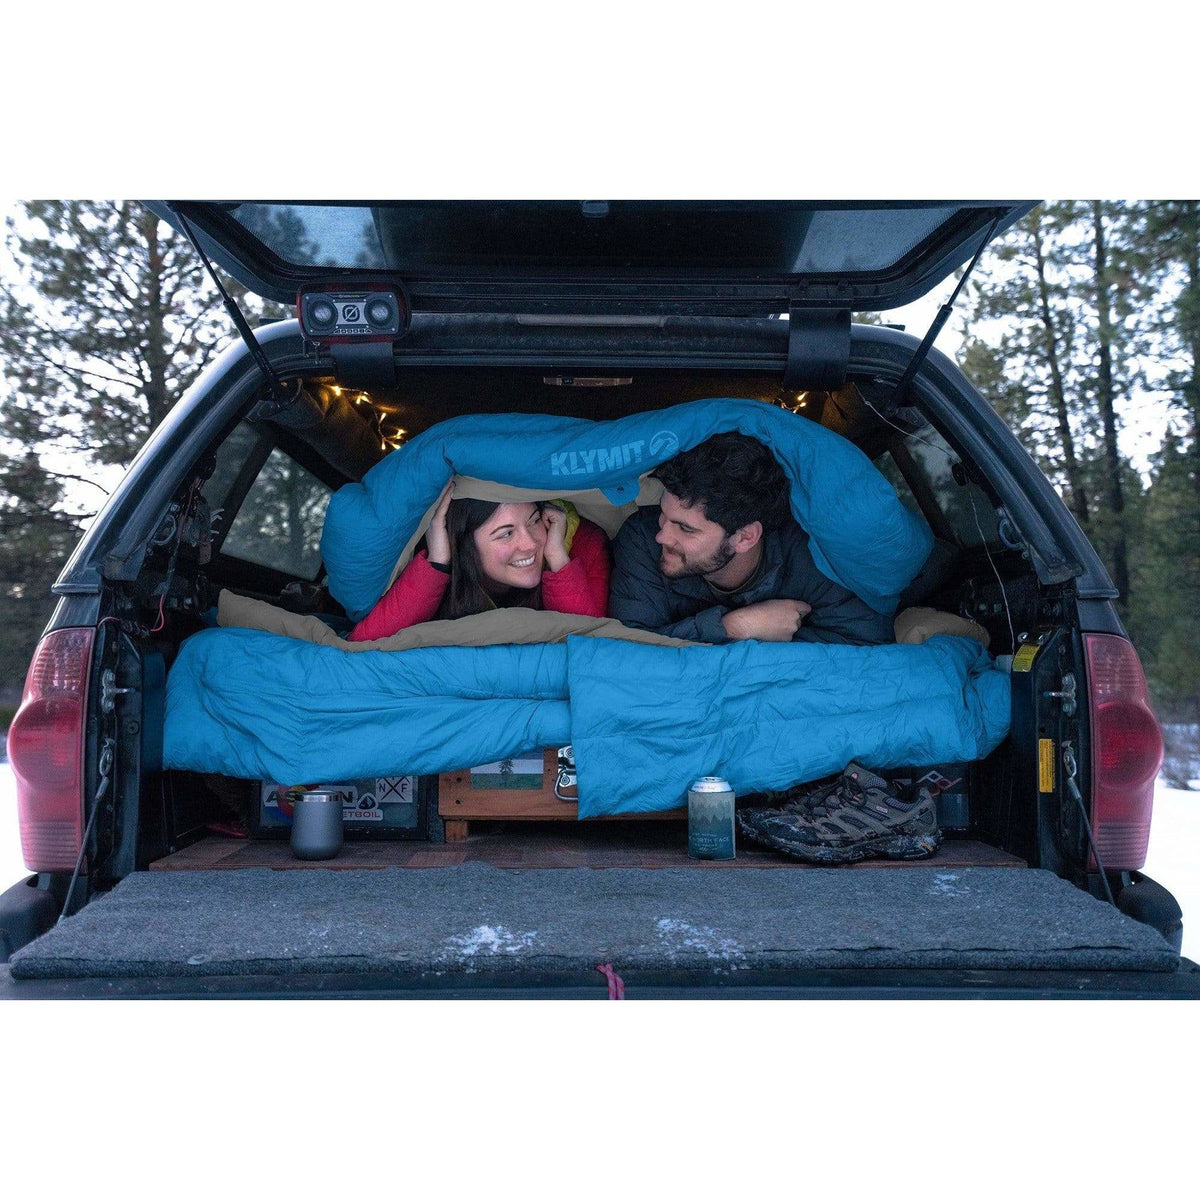 Klymit Camping Gear 30 Degree Two Person Full-Synthetic Sleeping Bag by Klymit